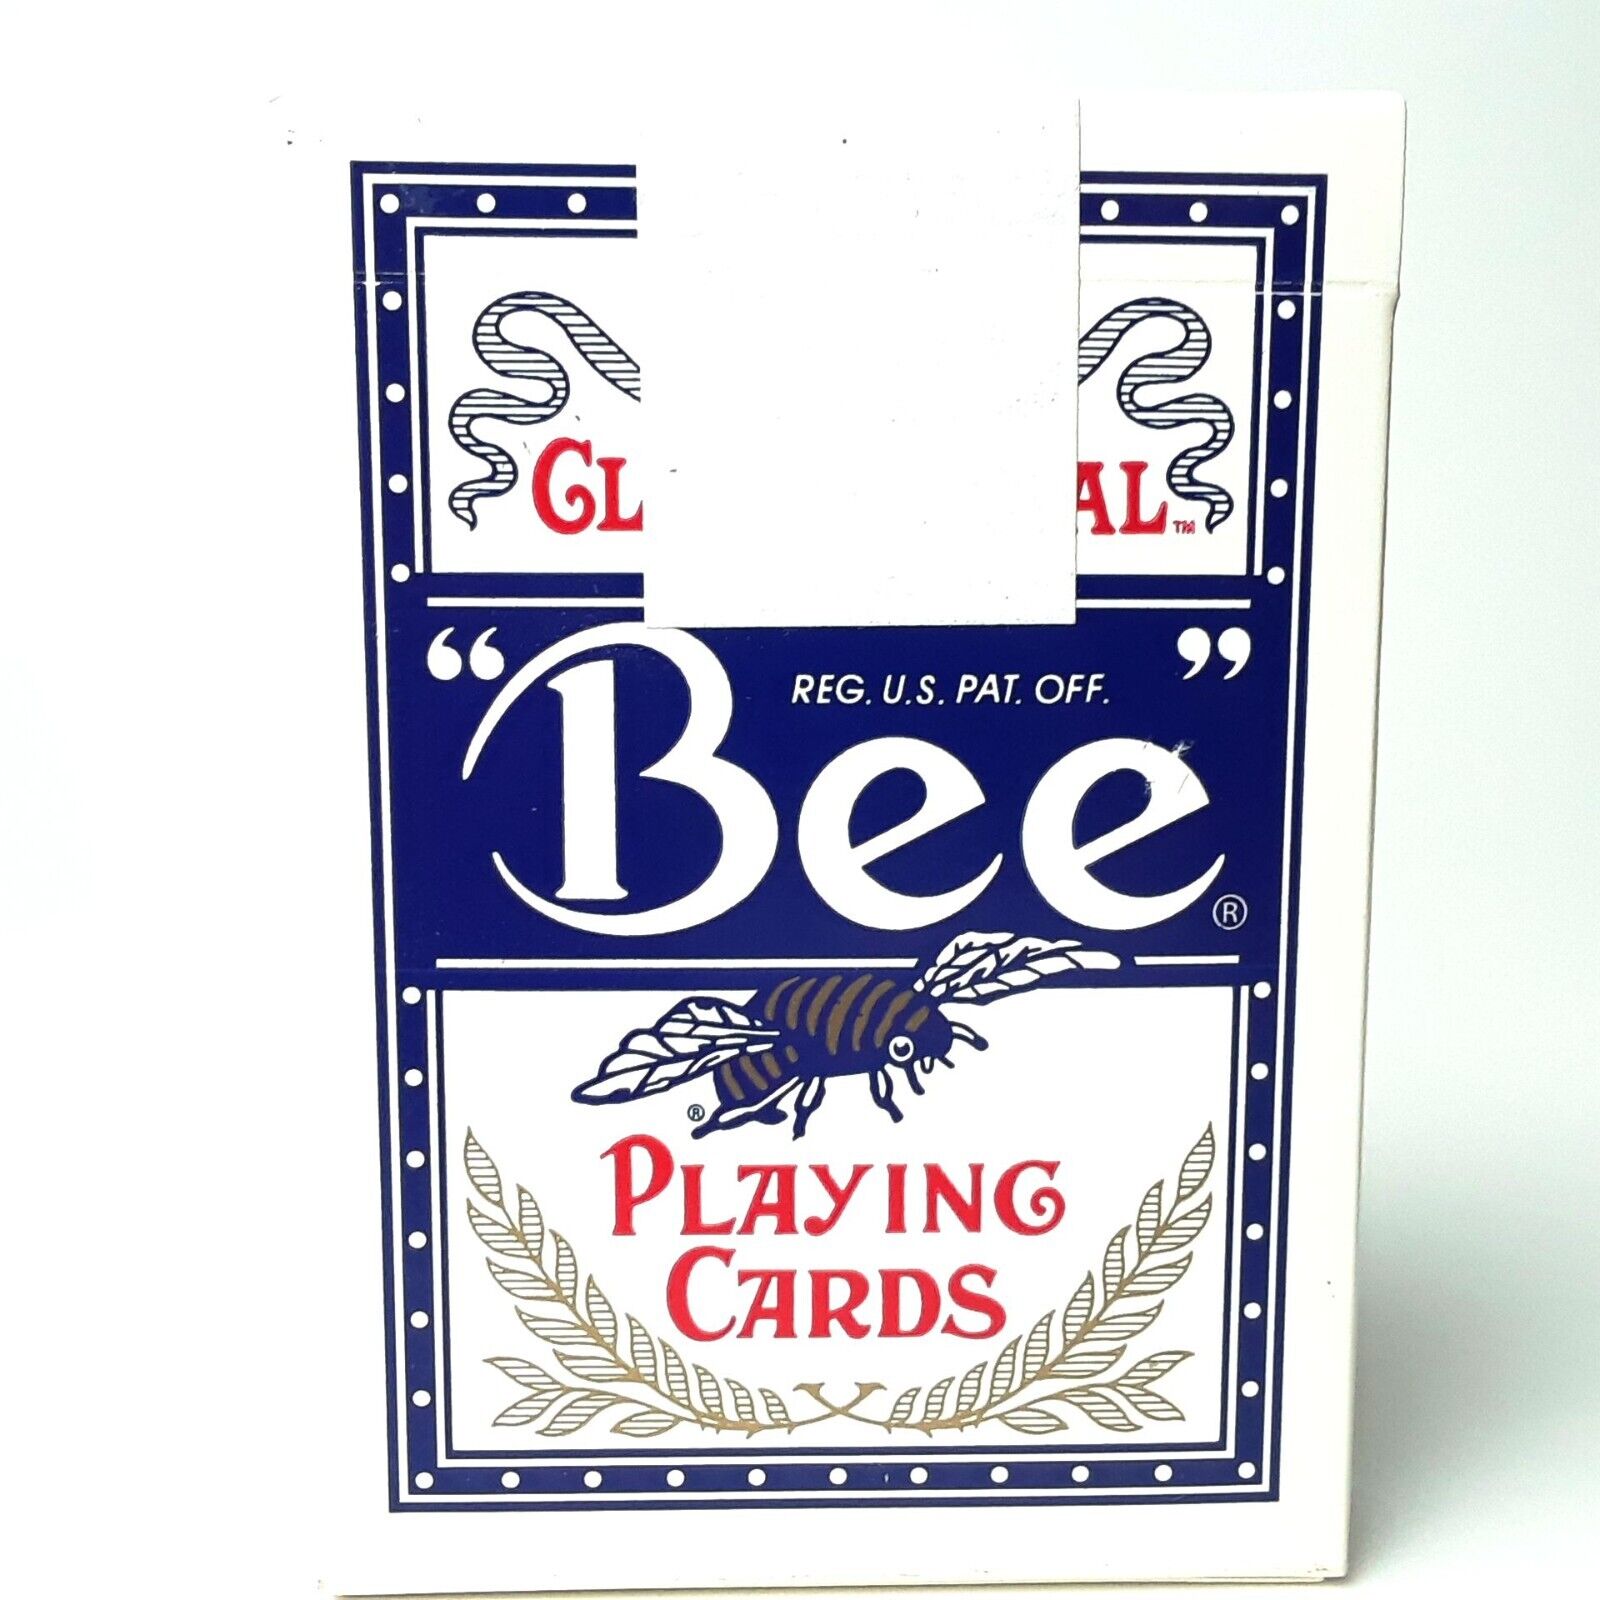 Lakeside Inn & Casino Lake Tahoe Blue & White Bee Club Special Playing Card Deck